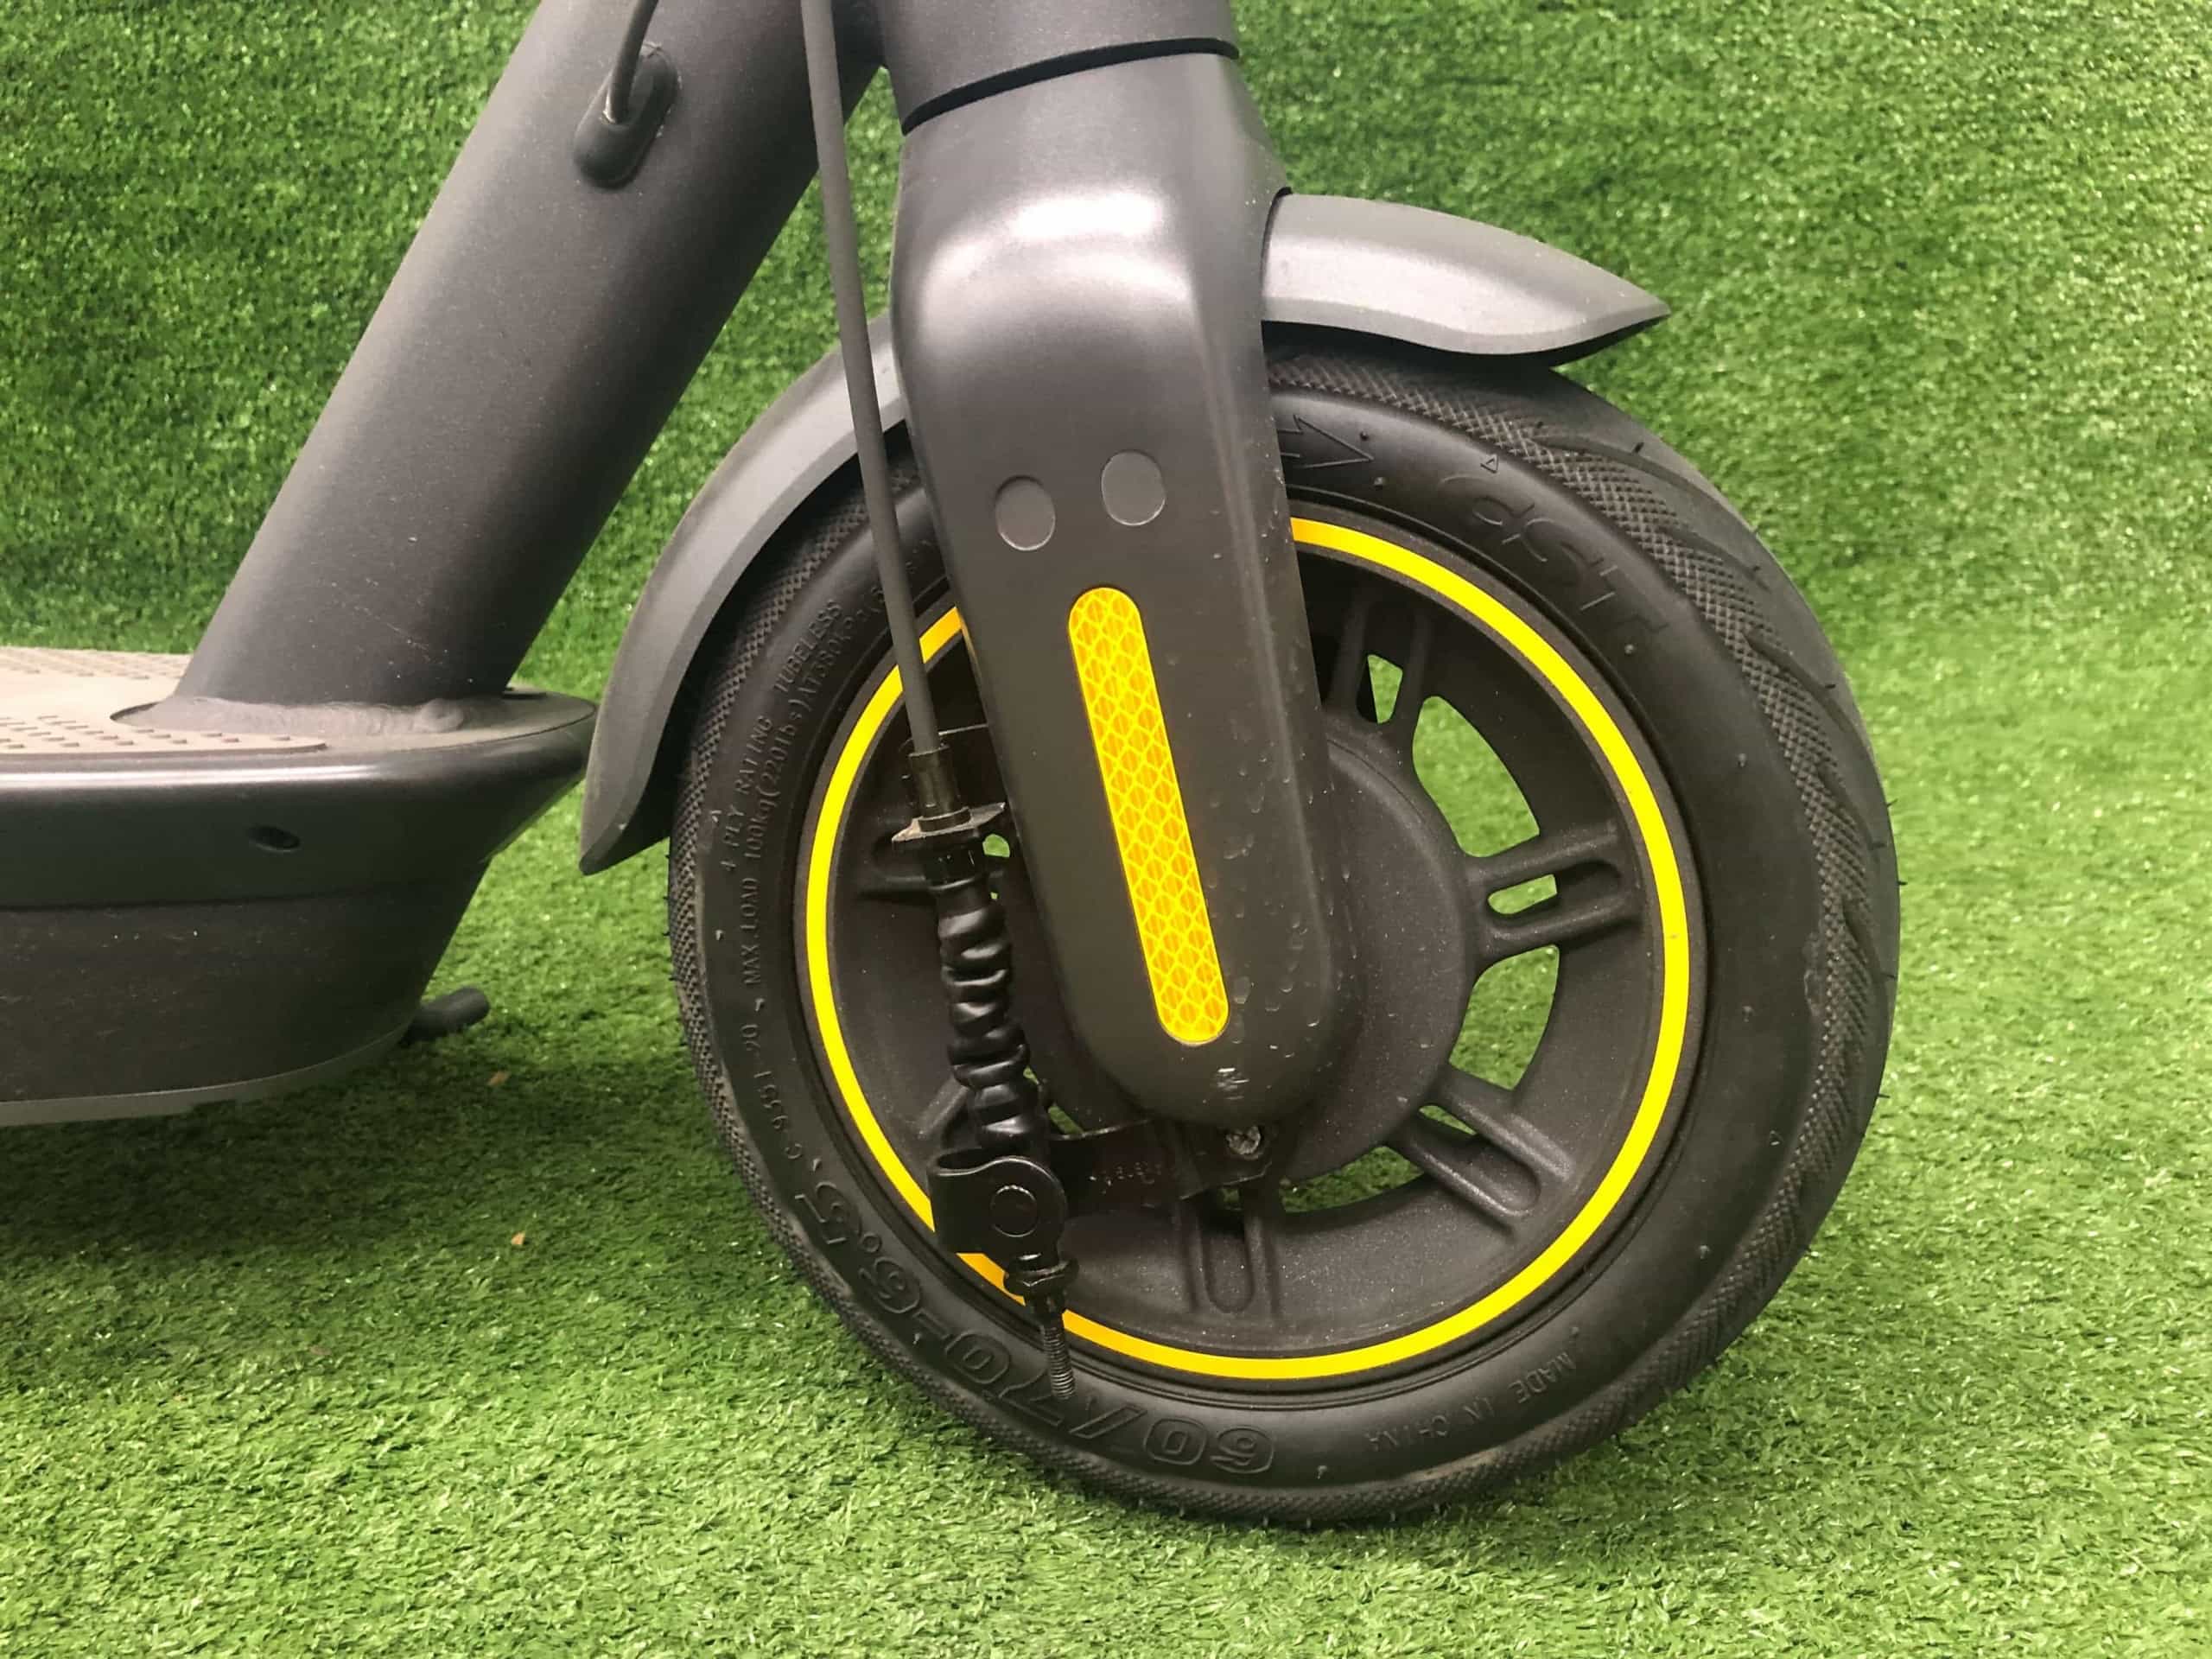 NINEBOT MAX UL2272 certified electric scooter drum brake scaled - Is NINEBOT MAX the best e-scooter released in 2019?